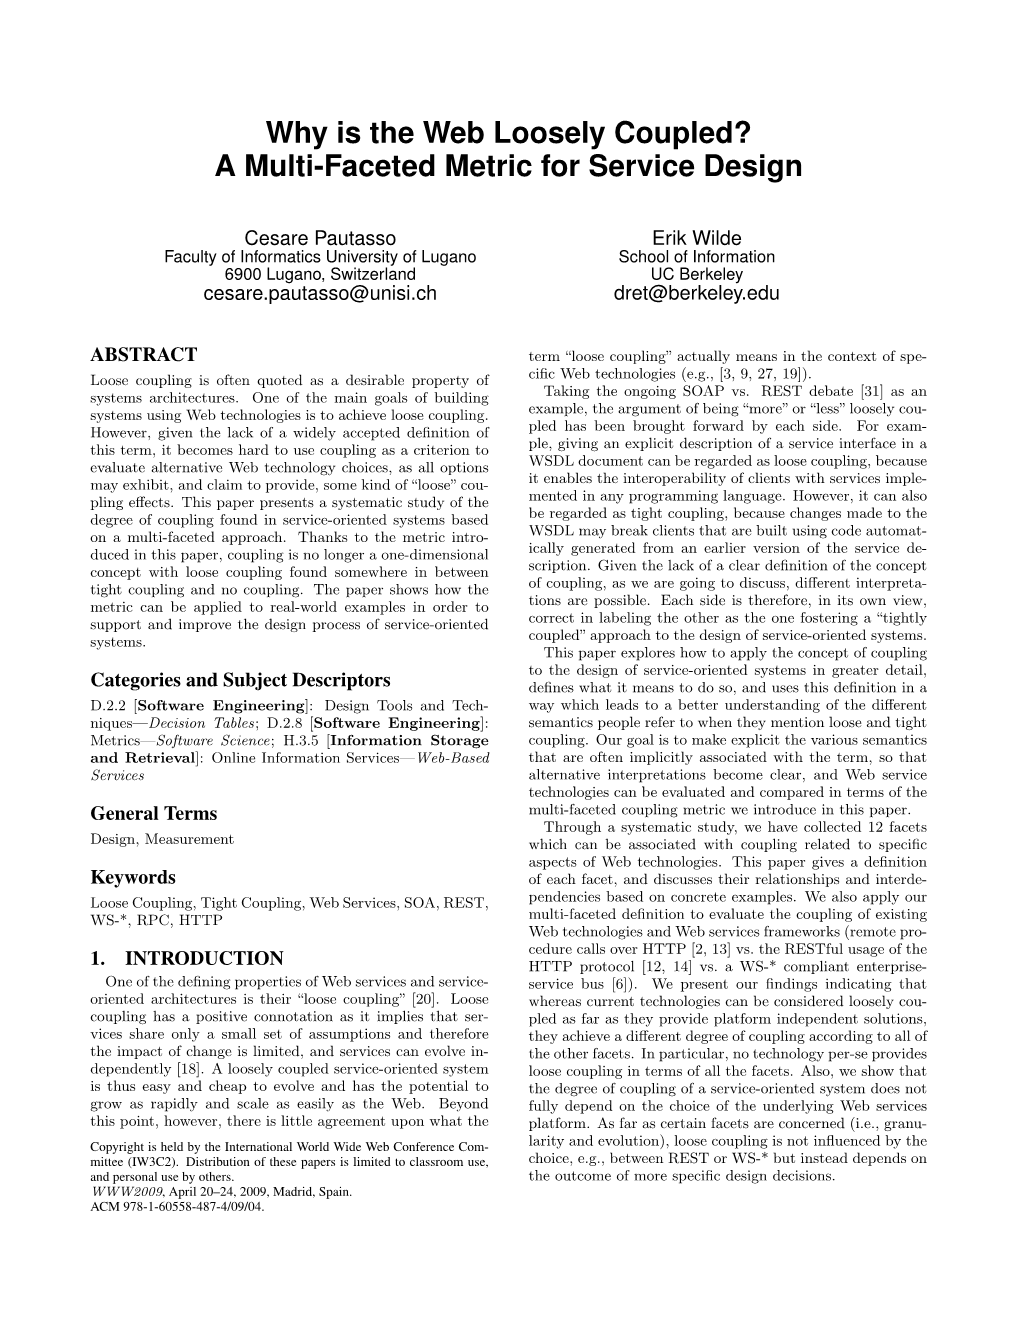 Why Is the Web Loosely Coupled? a Multi-Faceted Metric for Service Design